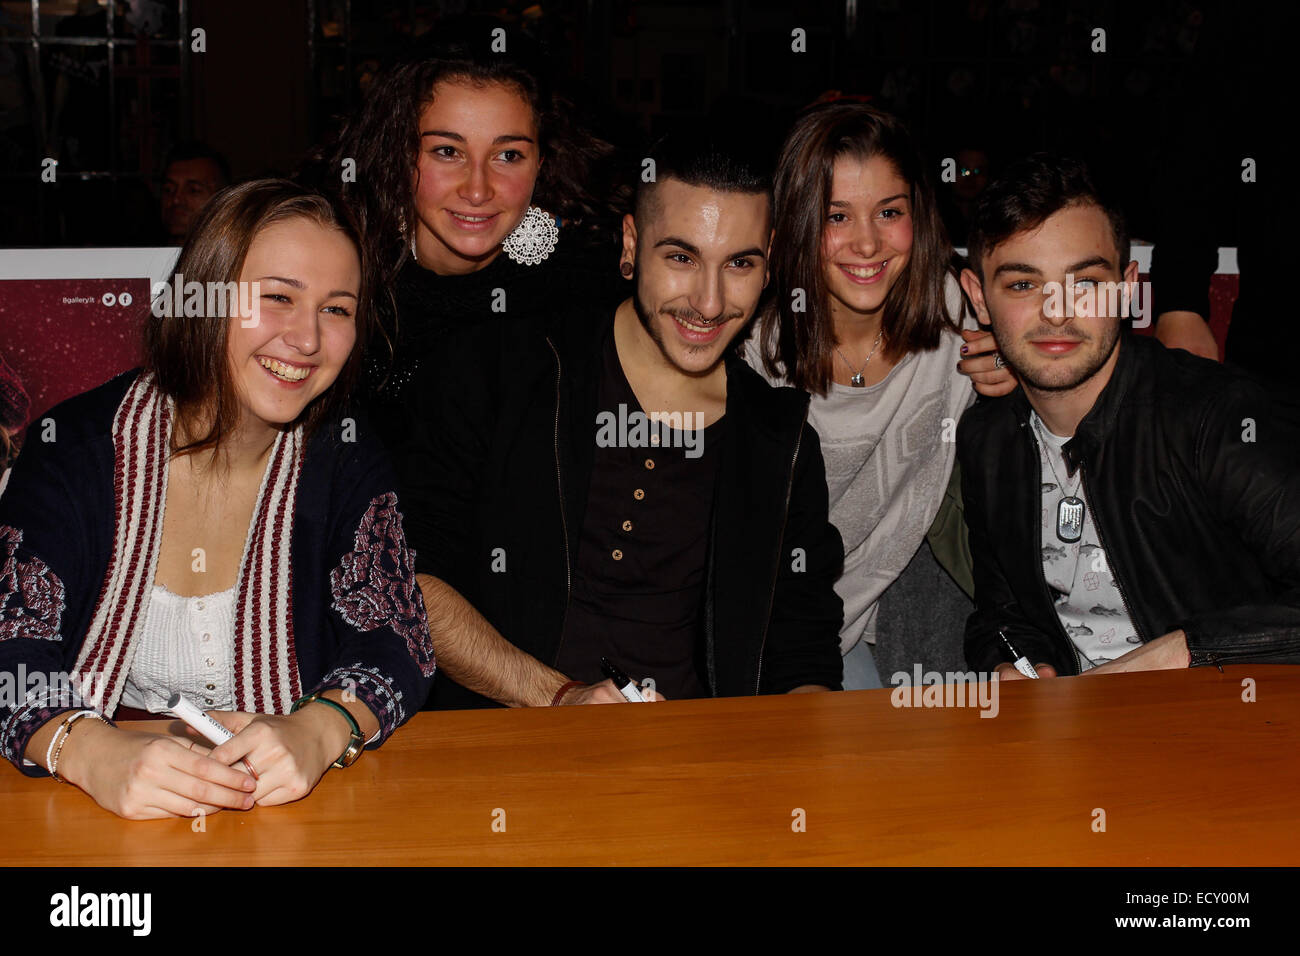 Italy. 21st Dec, 2014. The finalists of X Factor 2014 Lorenzo Fragola (winner), Madh (second place) and Ilaria (third place) performed live at the shopping center 8 Gallery. Also they signed copies of EP to their fans. Credit:  Elena Aquila/Pacific Press/Alamy Live News Stock Photo